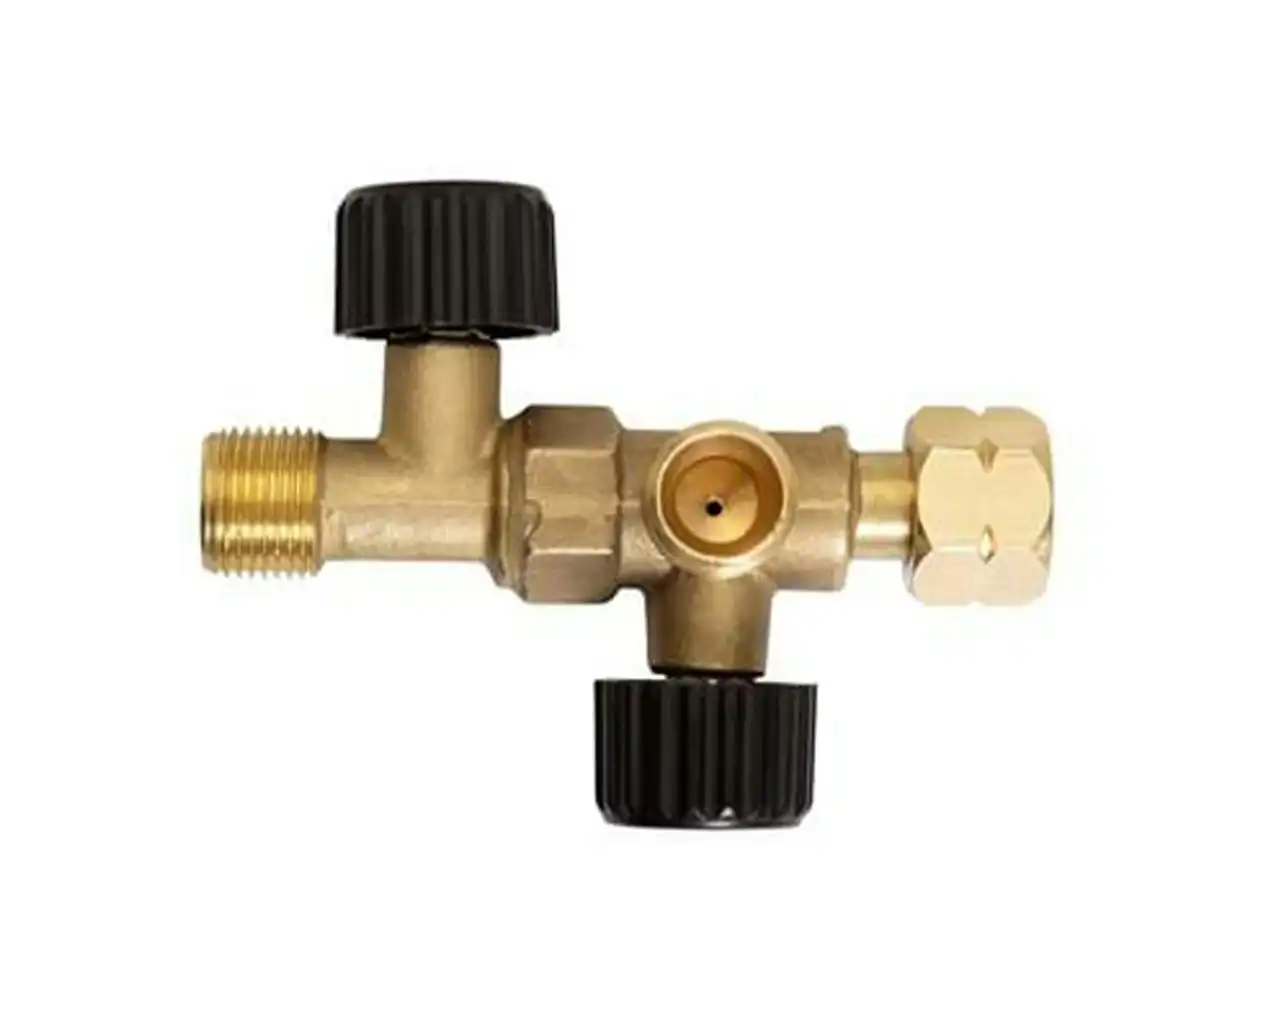 Gasmate Adaptor - 3/8 BSP LH 2 Way Valve with 1 Inlet & 2 Outlets